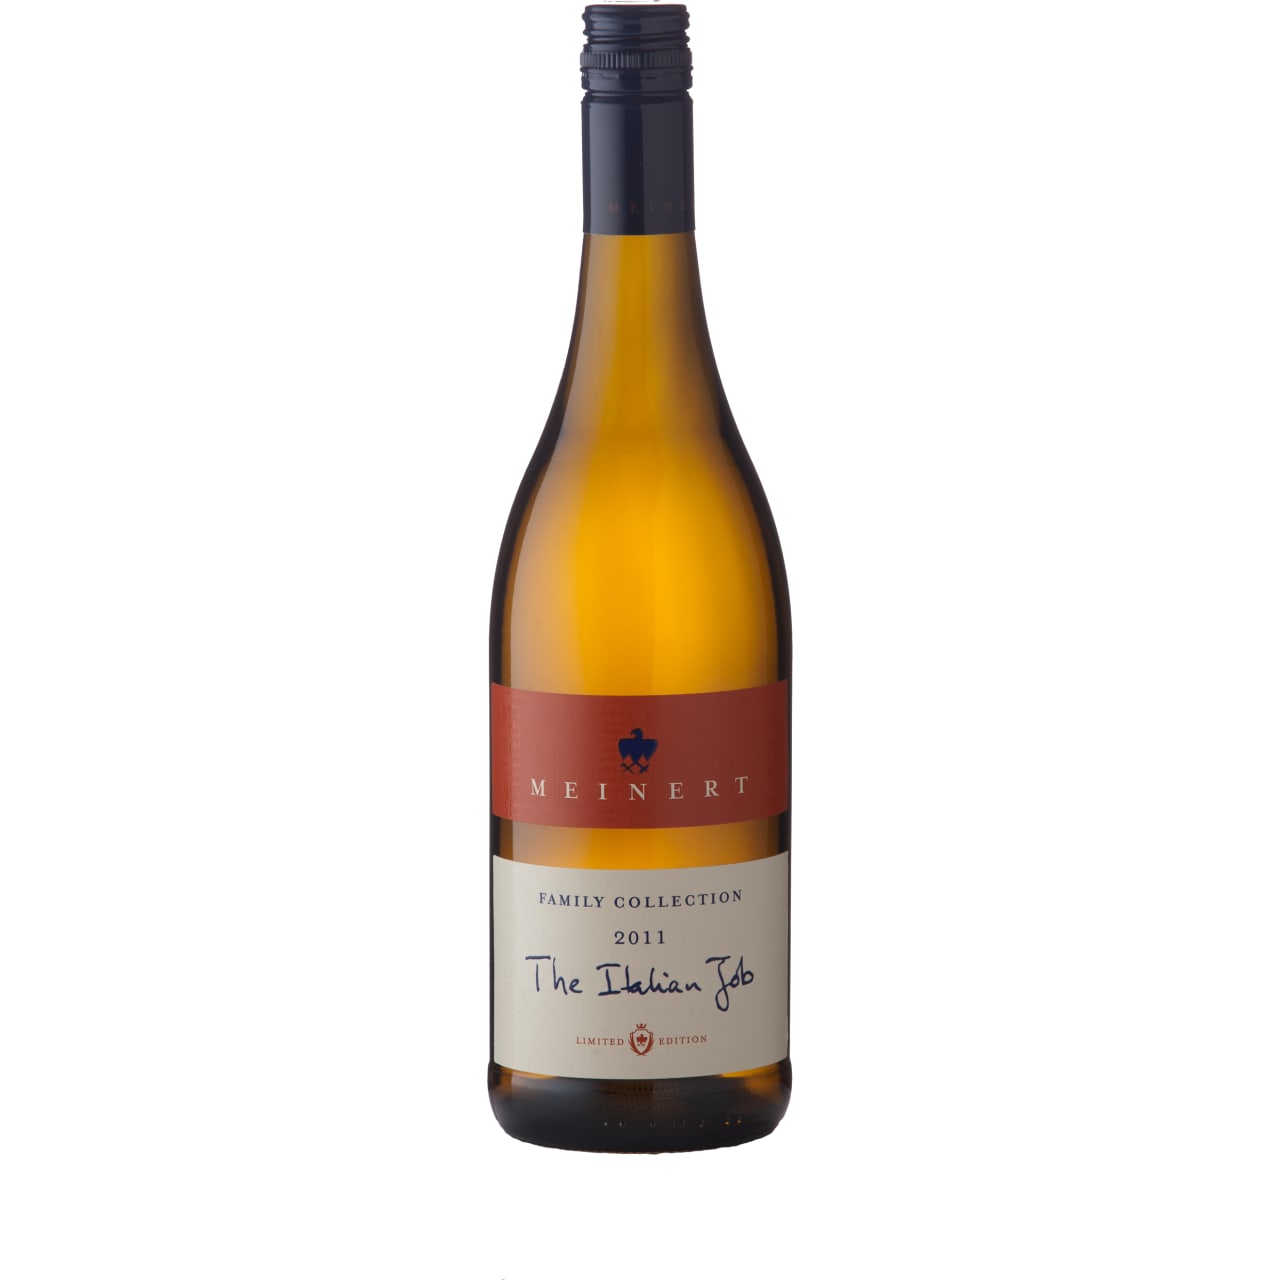 A wine that is rich and sumptuous, with creme anglaise, pineapple, butter and delicate wood character. Intense, with a sustained, flavoursome finish.